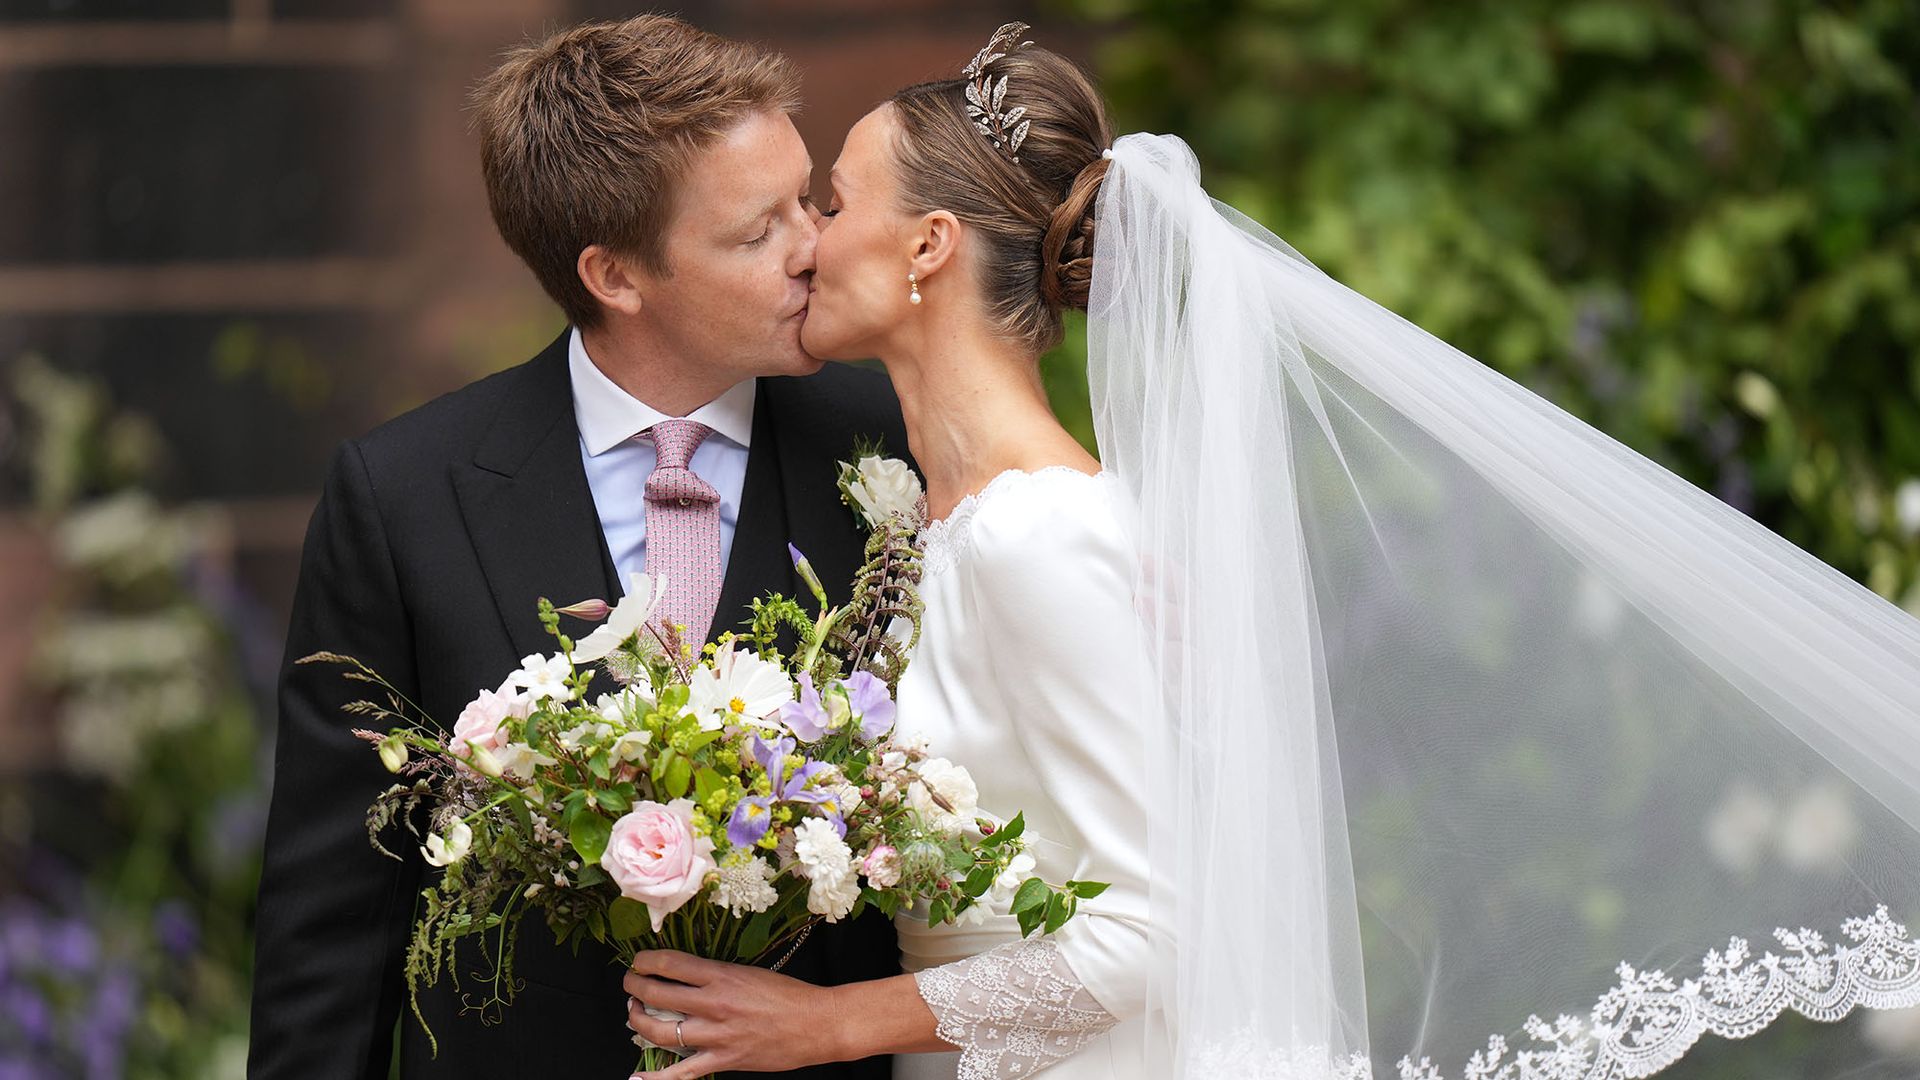 Hugh and Olivia kiss after their wedding